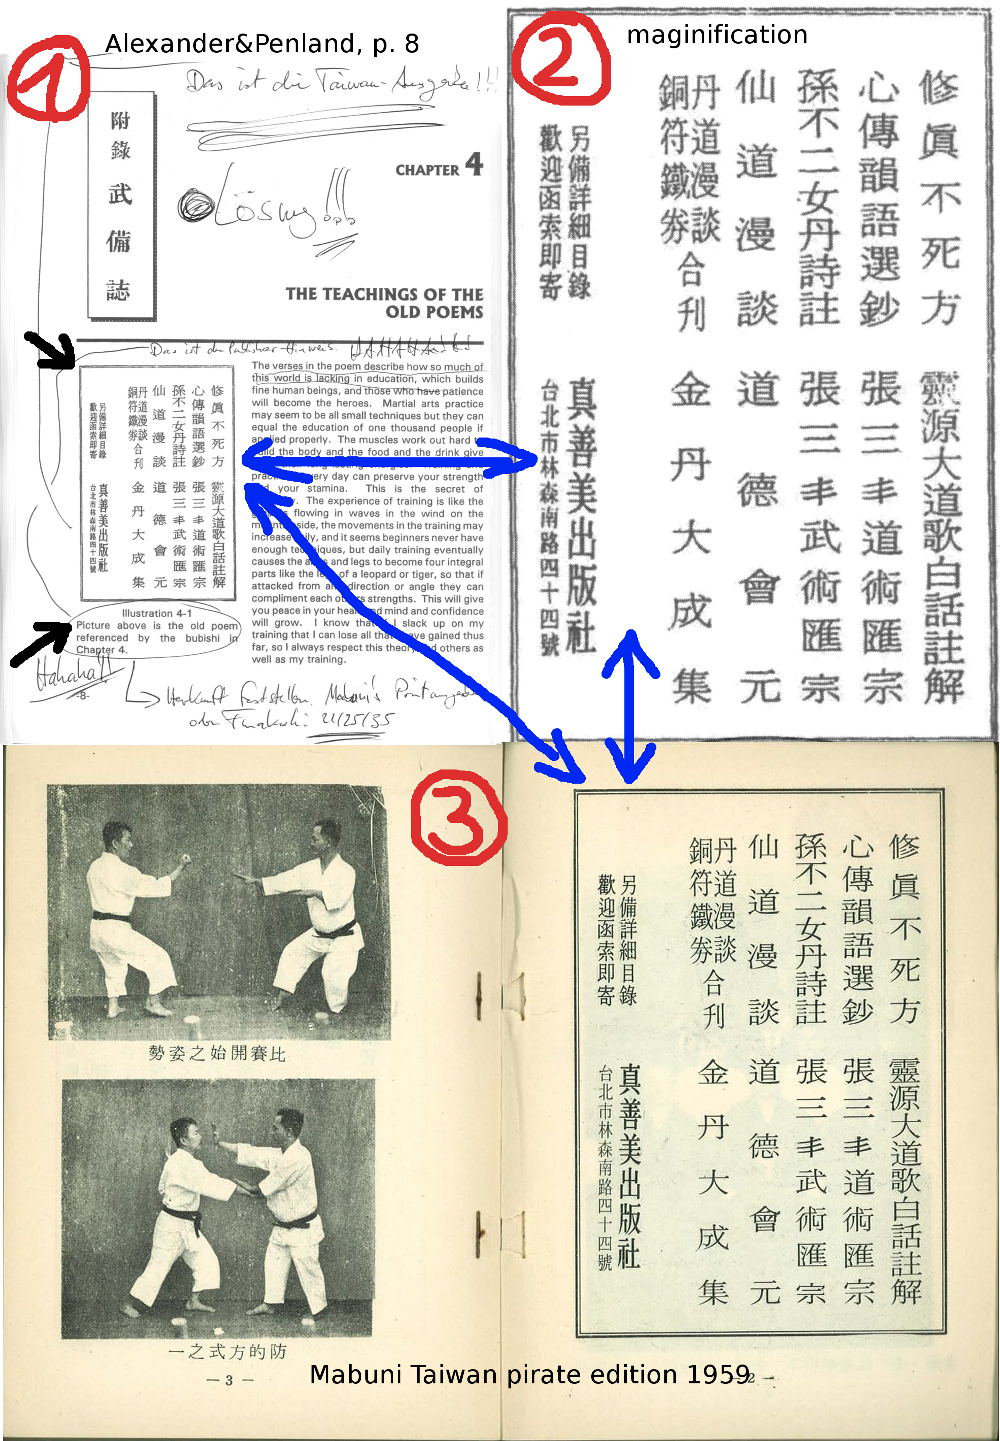 Illustration "old poem referenced by the bubishi", which in fact shows publication data found on page 2 of the 1959 Taiwan pirate edition of Mabuni Kenwa’s 1934 work.